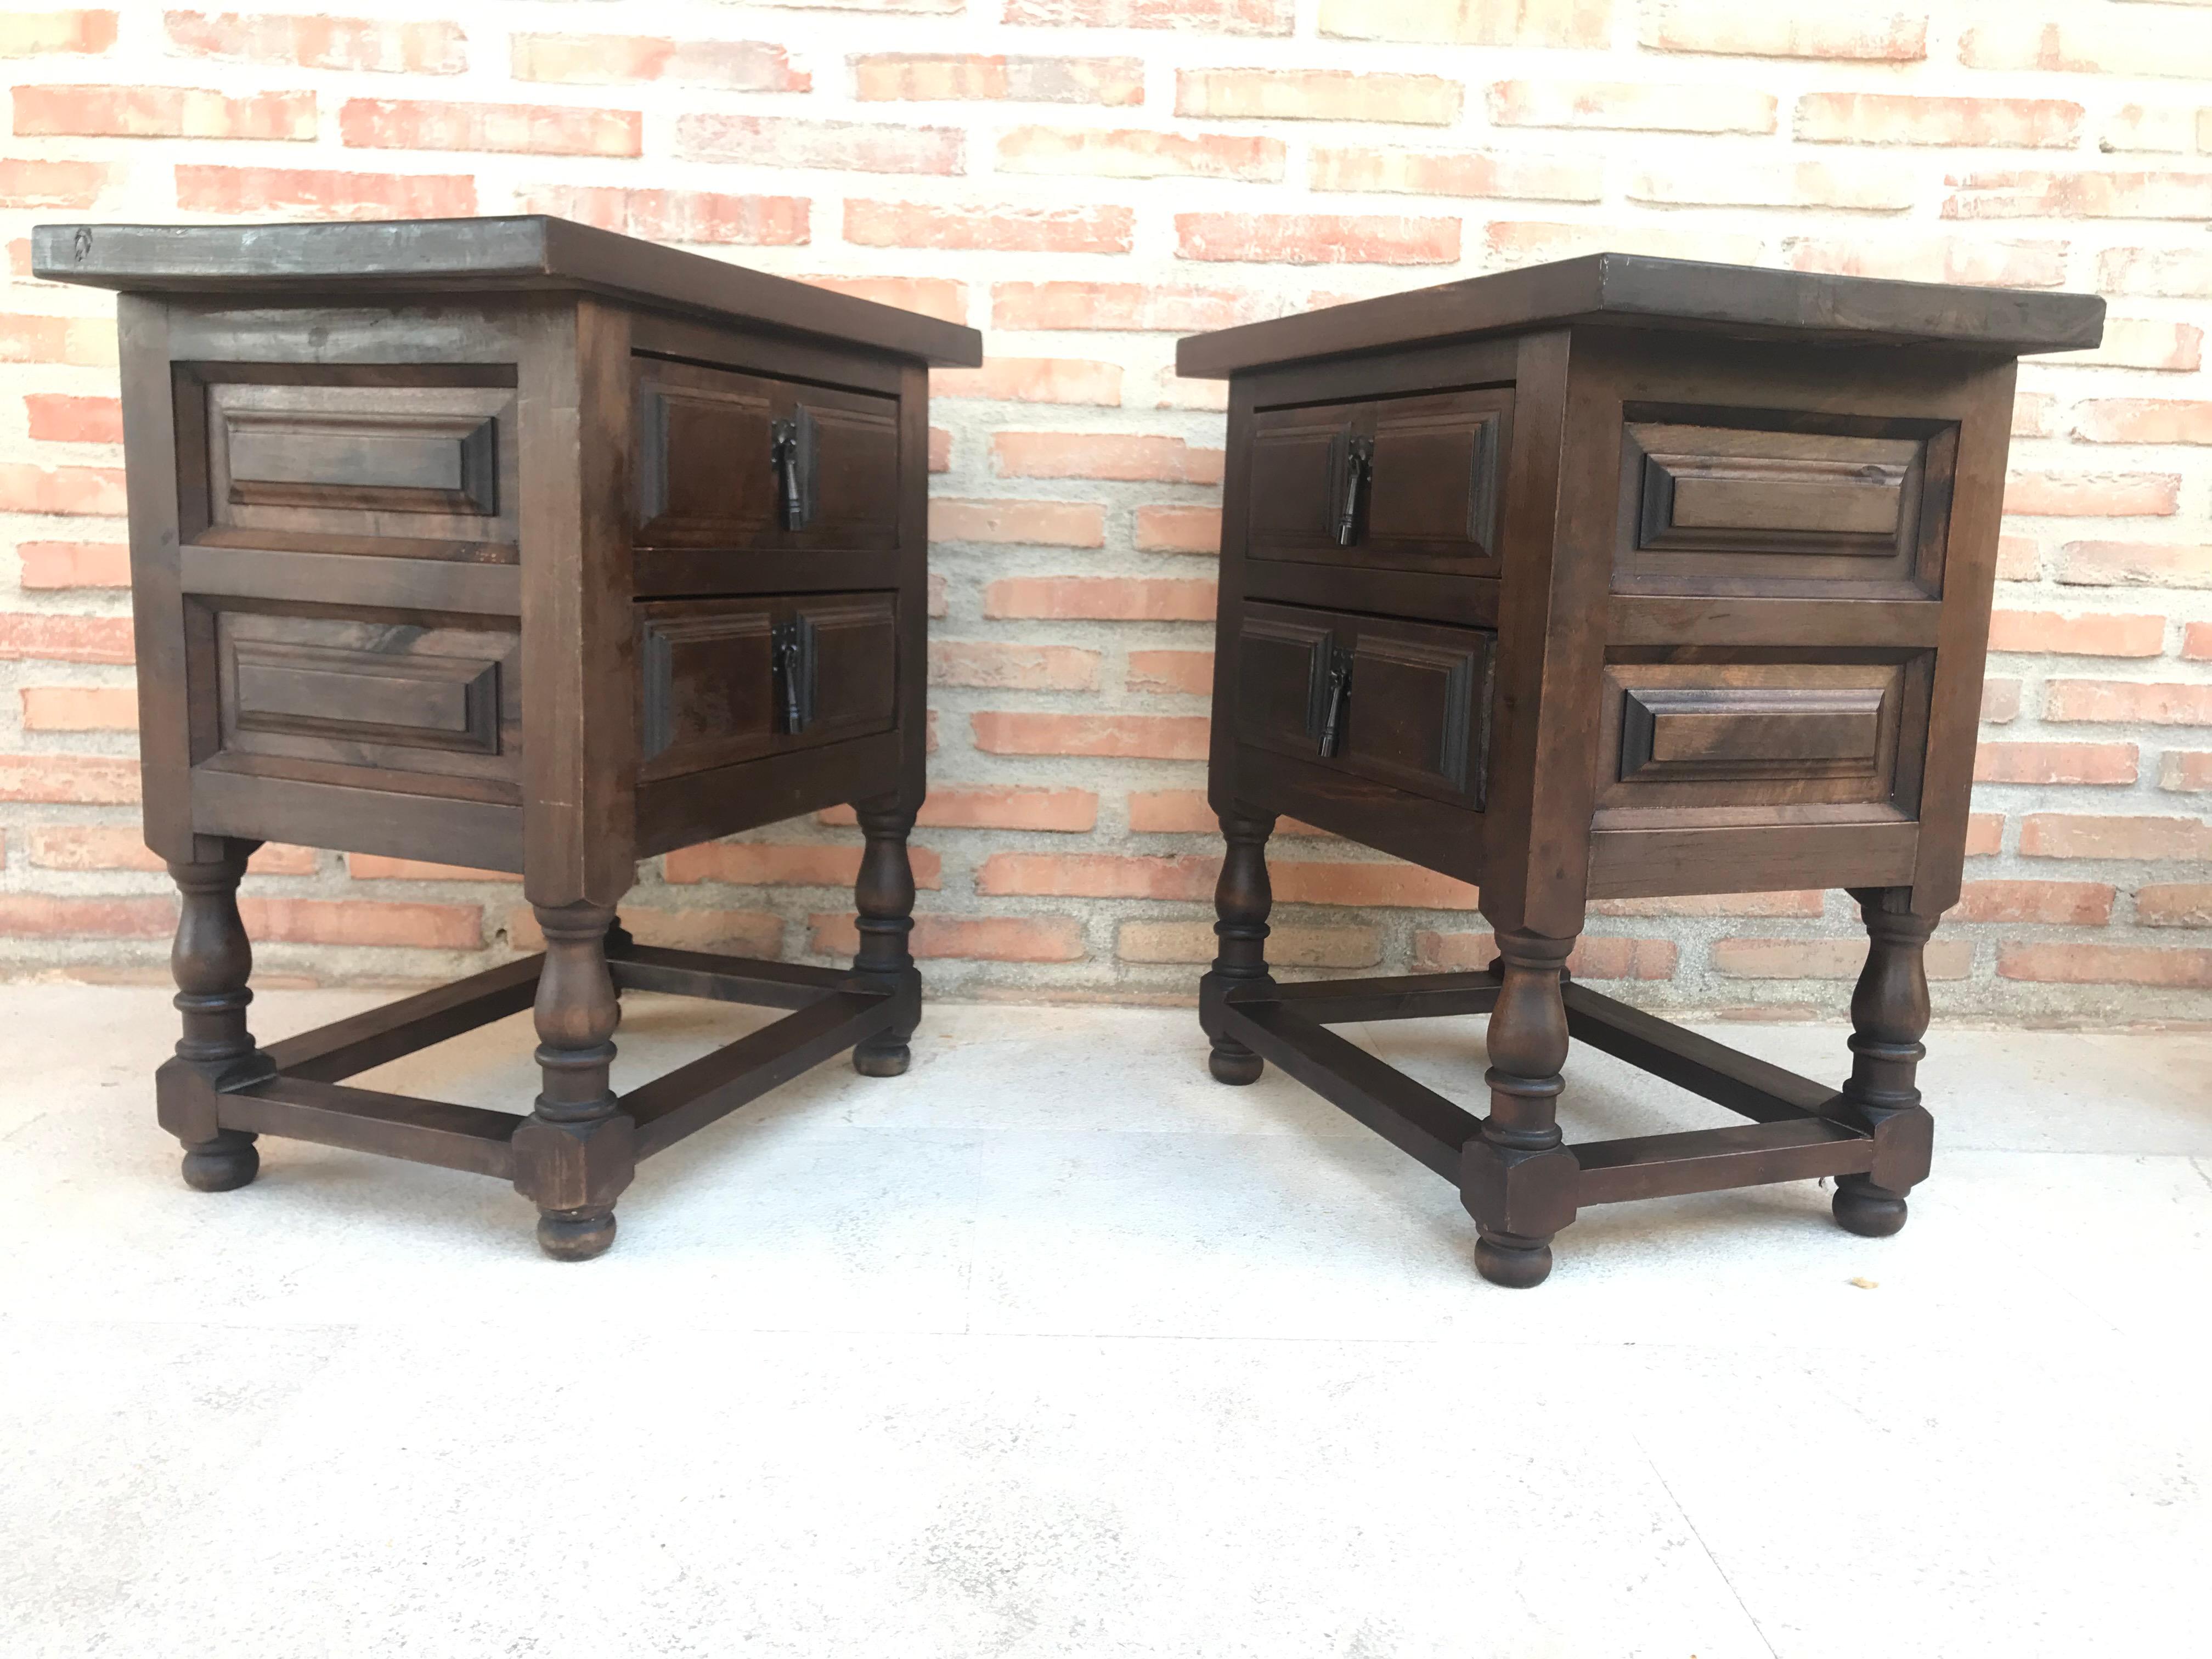 Spanish Colonial 20th Century Pair of Spanish Nightstands with Two Drawers and Iron Hardware